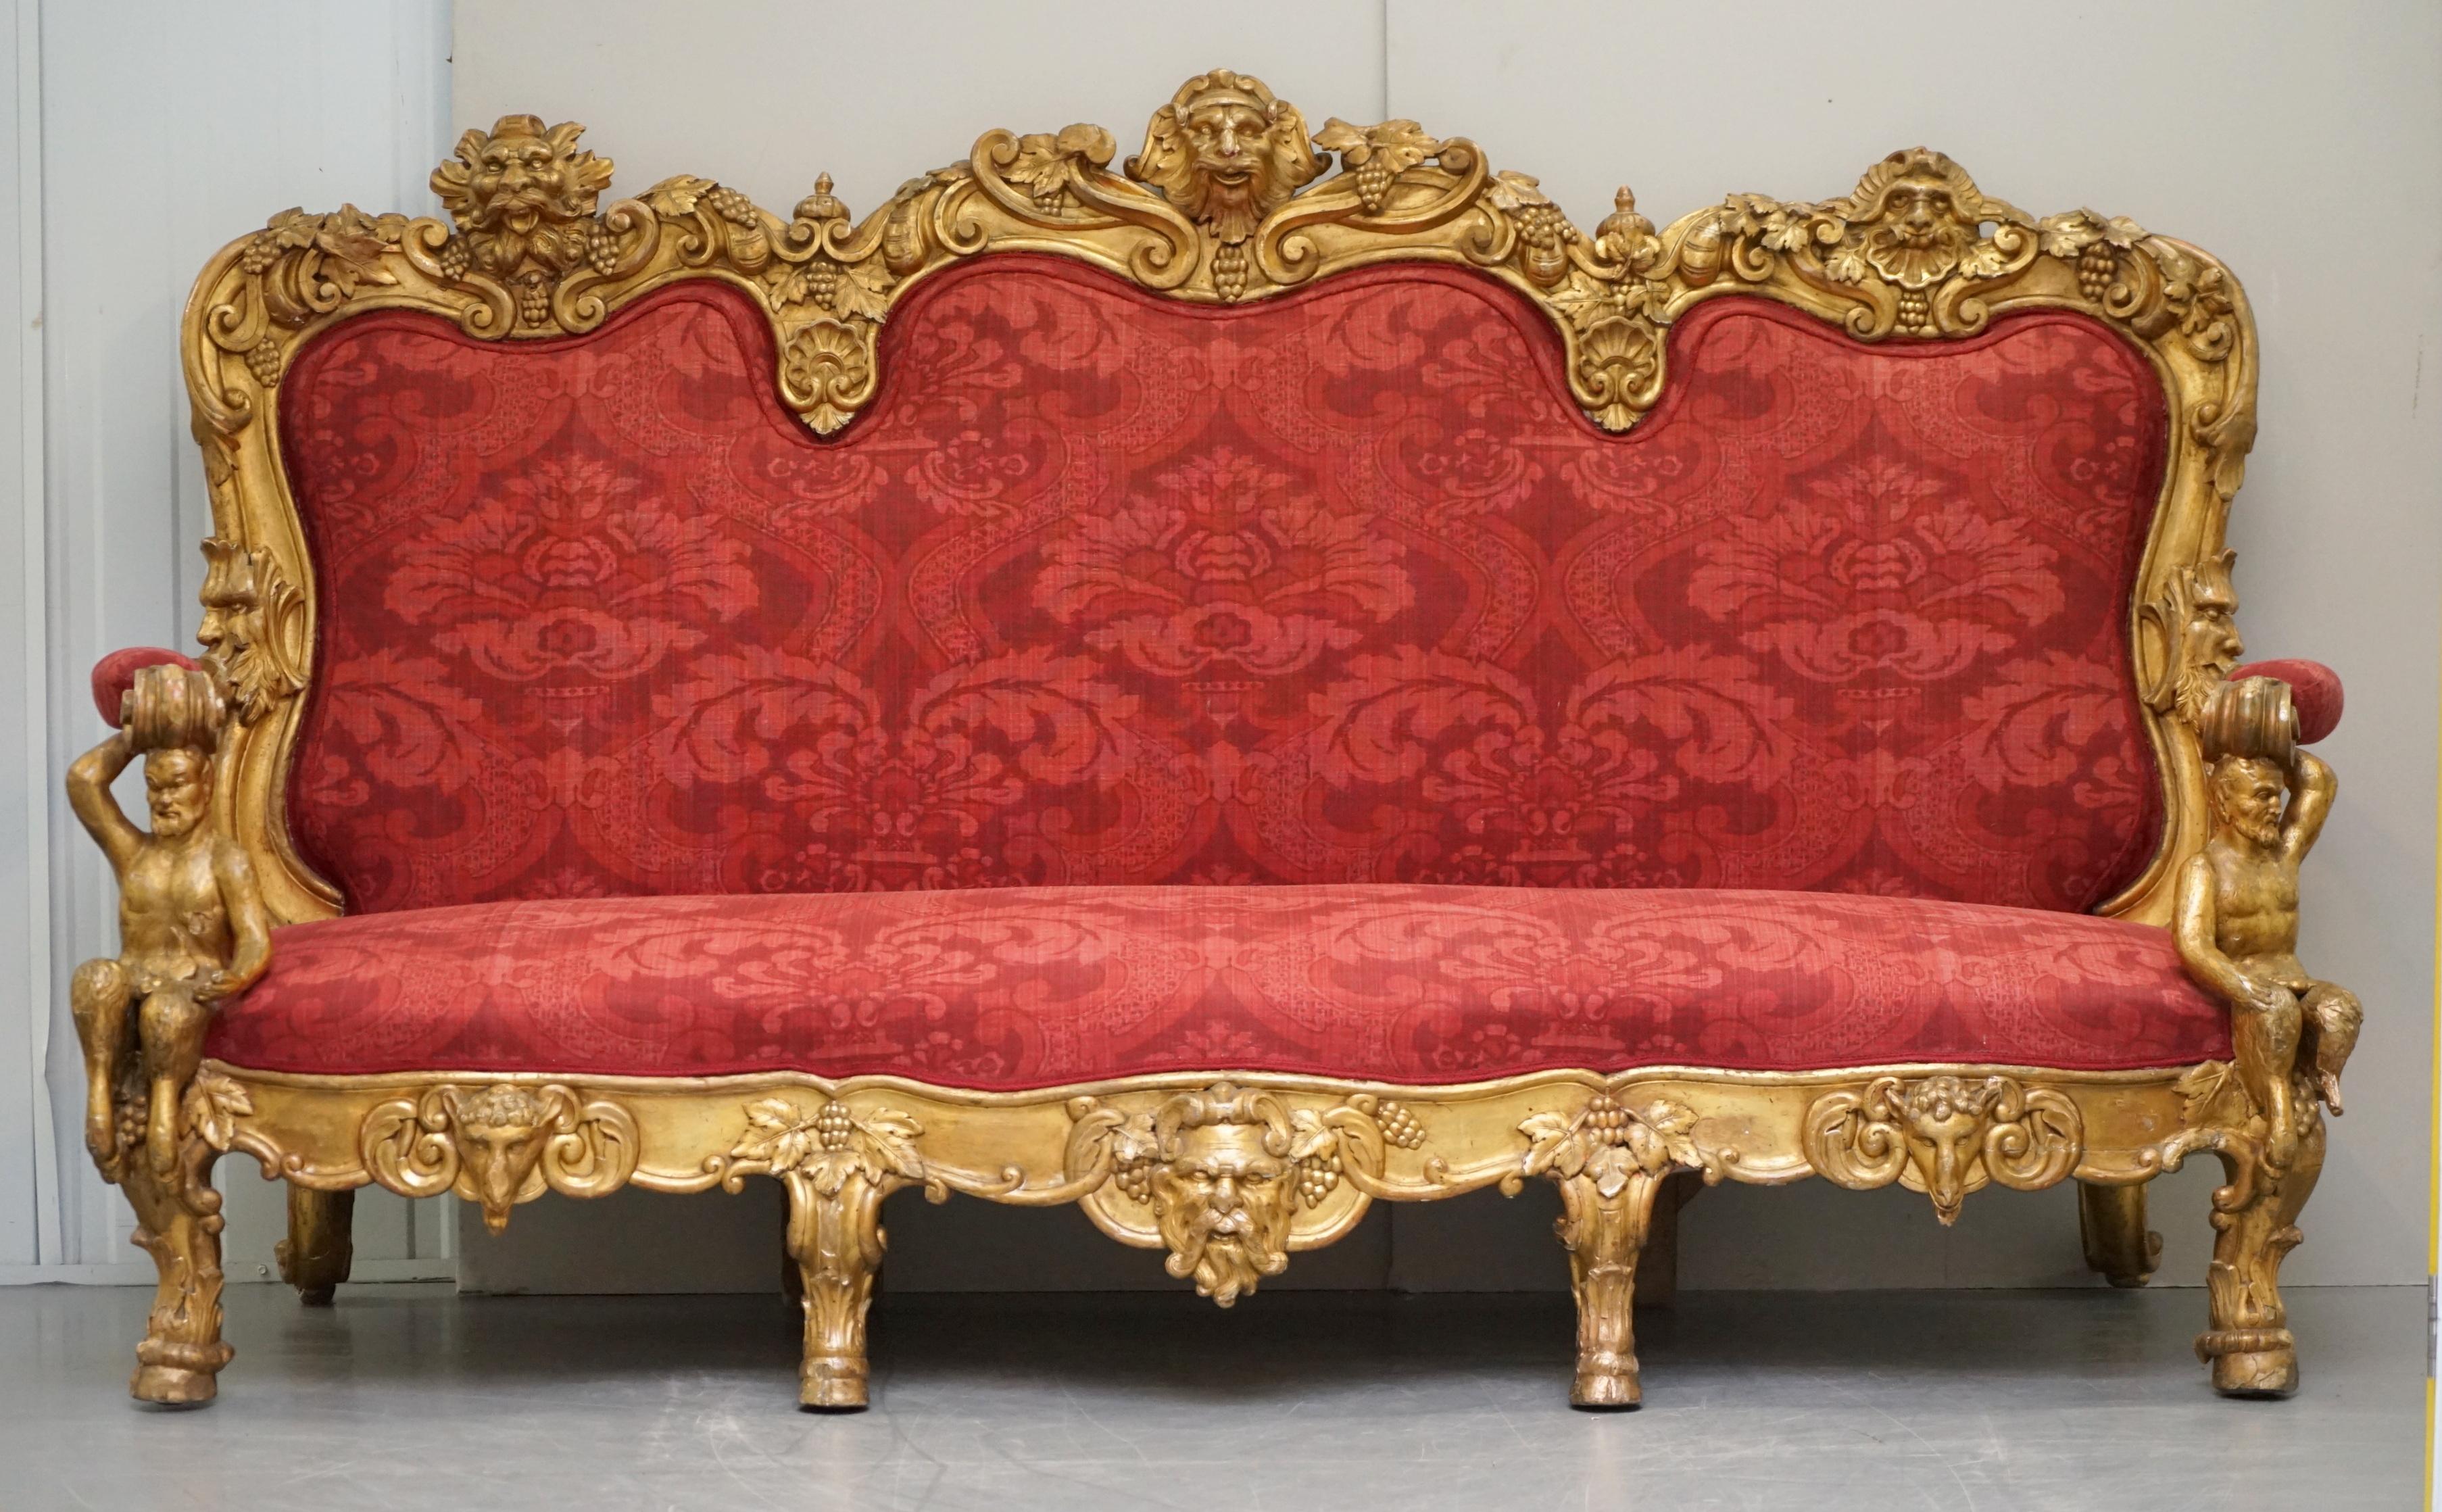 High Victorian Sublime Hand Carved circa 1860 Paris France Baroque Gold Giltwood Settee Sofa